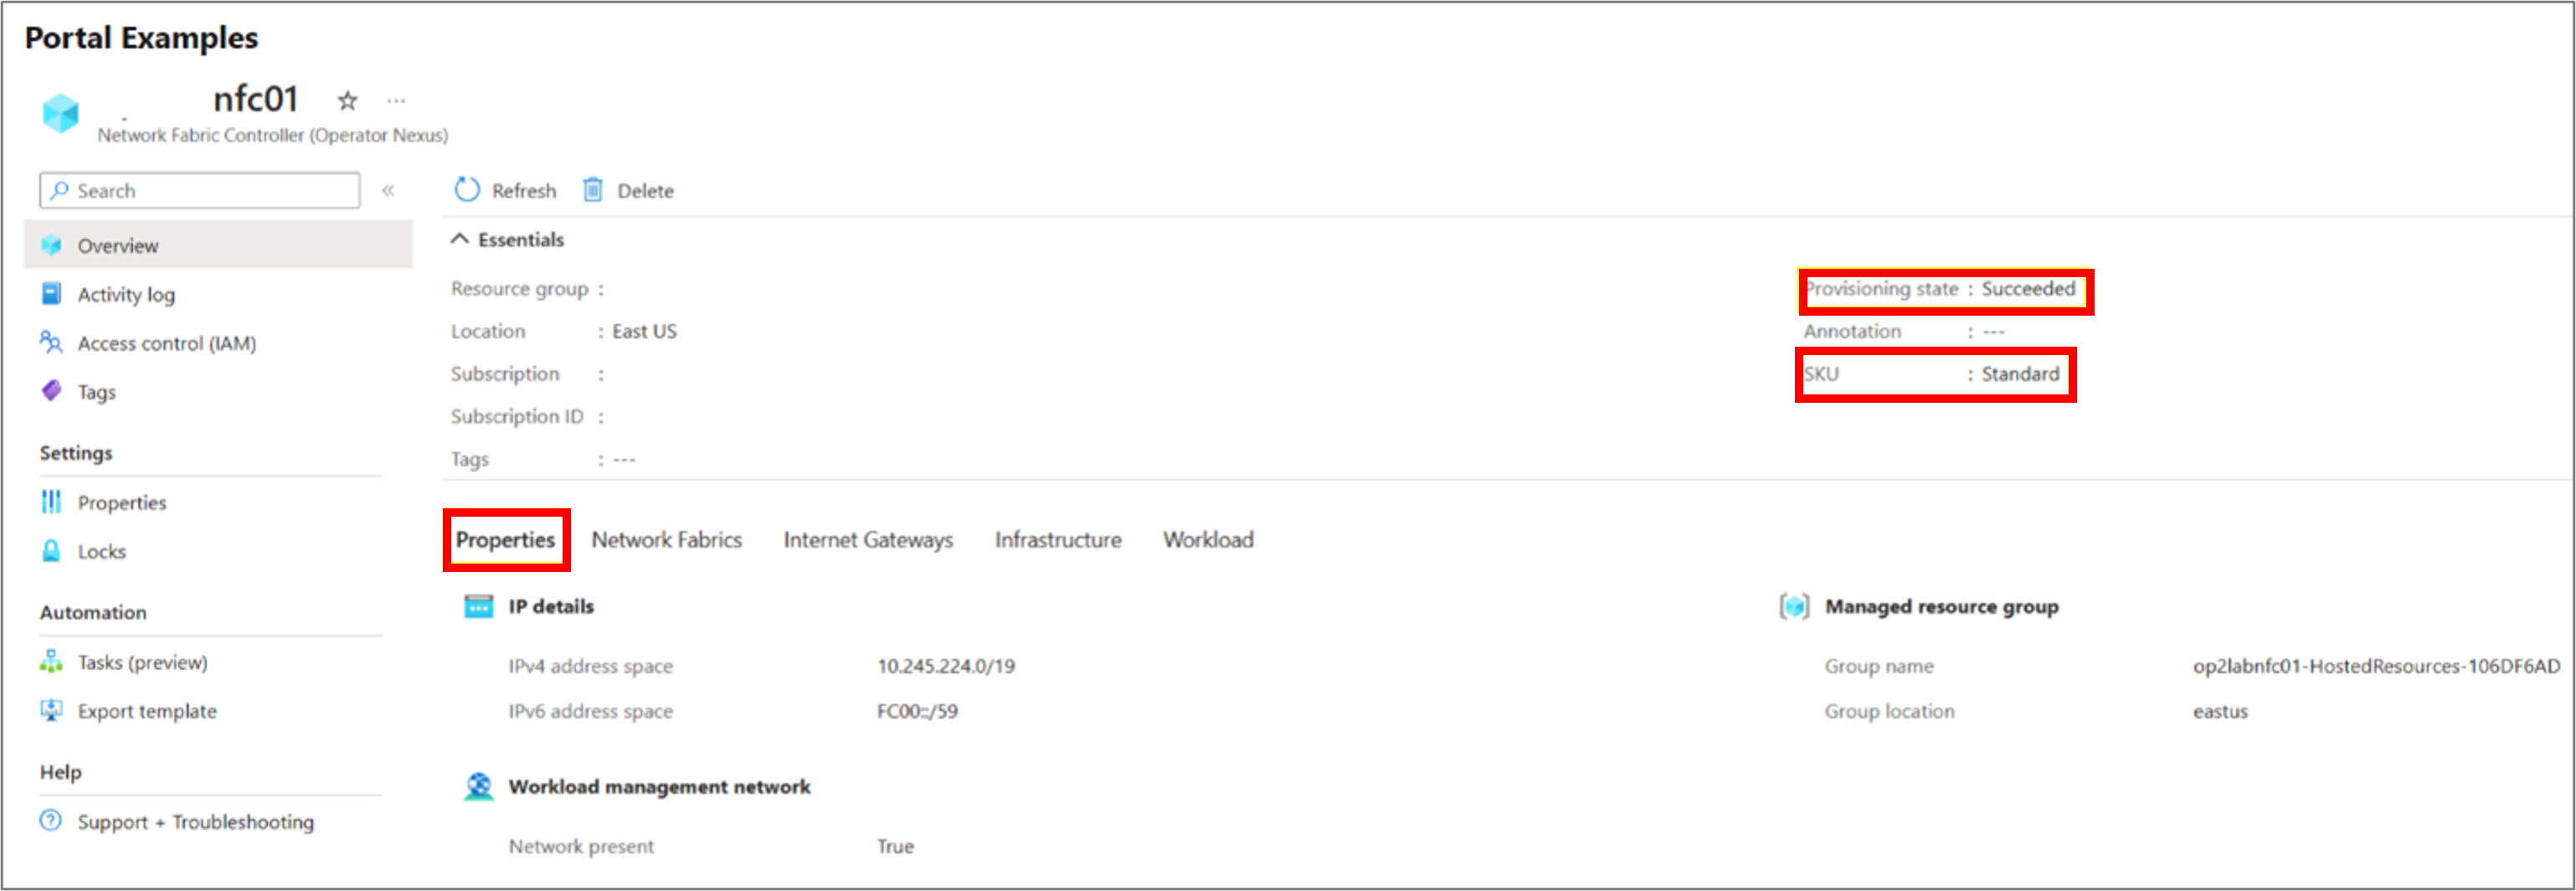 A screenshot of the Azure portal interface showing the overview of a Network Fabric Controller.